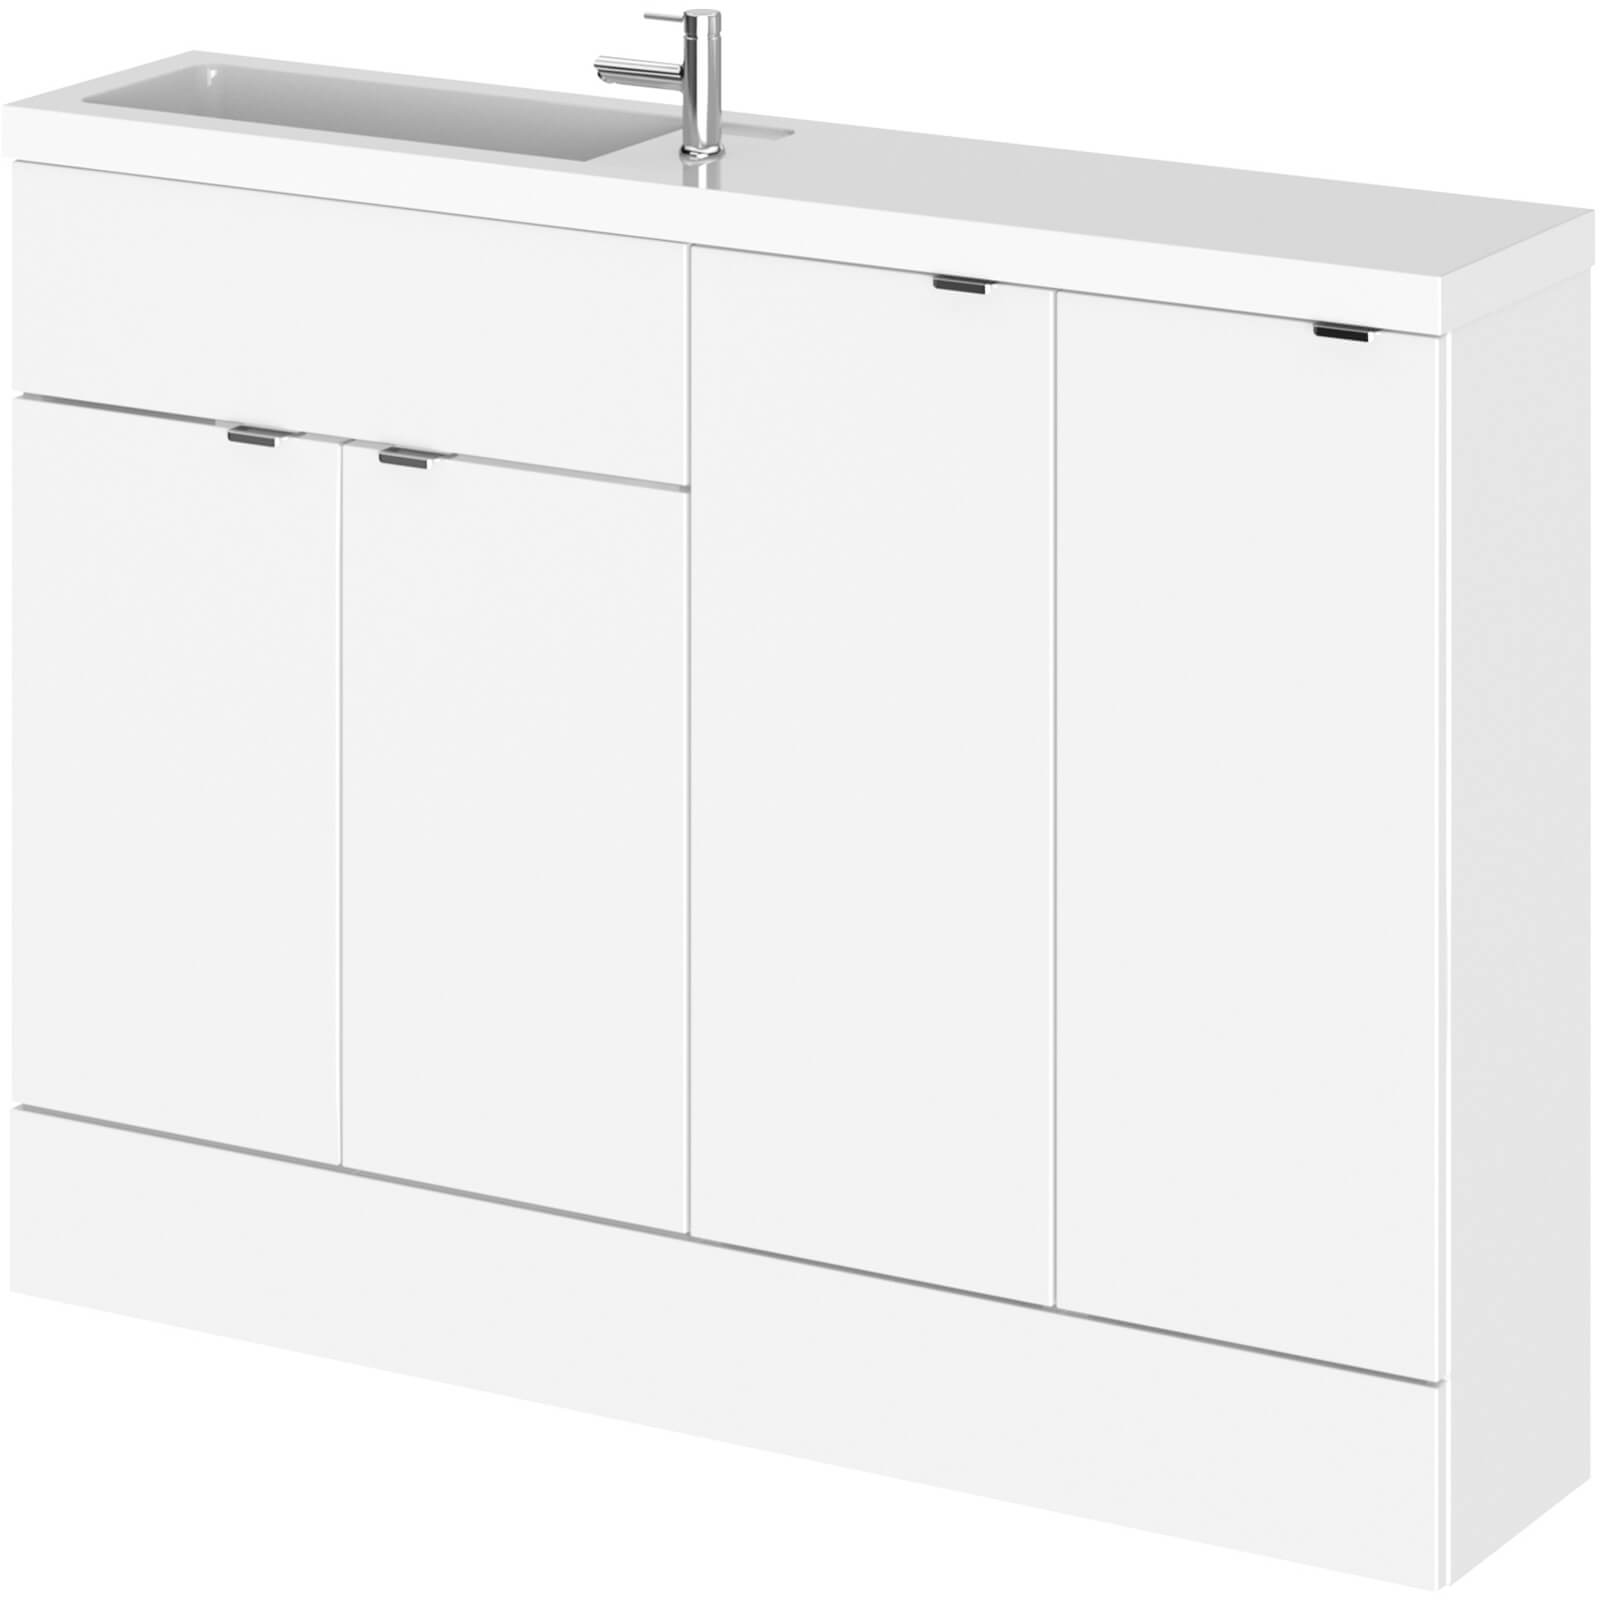 Balterley Dynamic 1200mm Compact Combination Unit - Gloss White